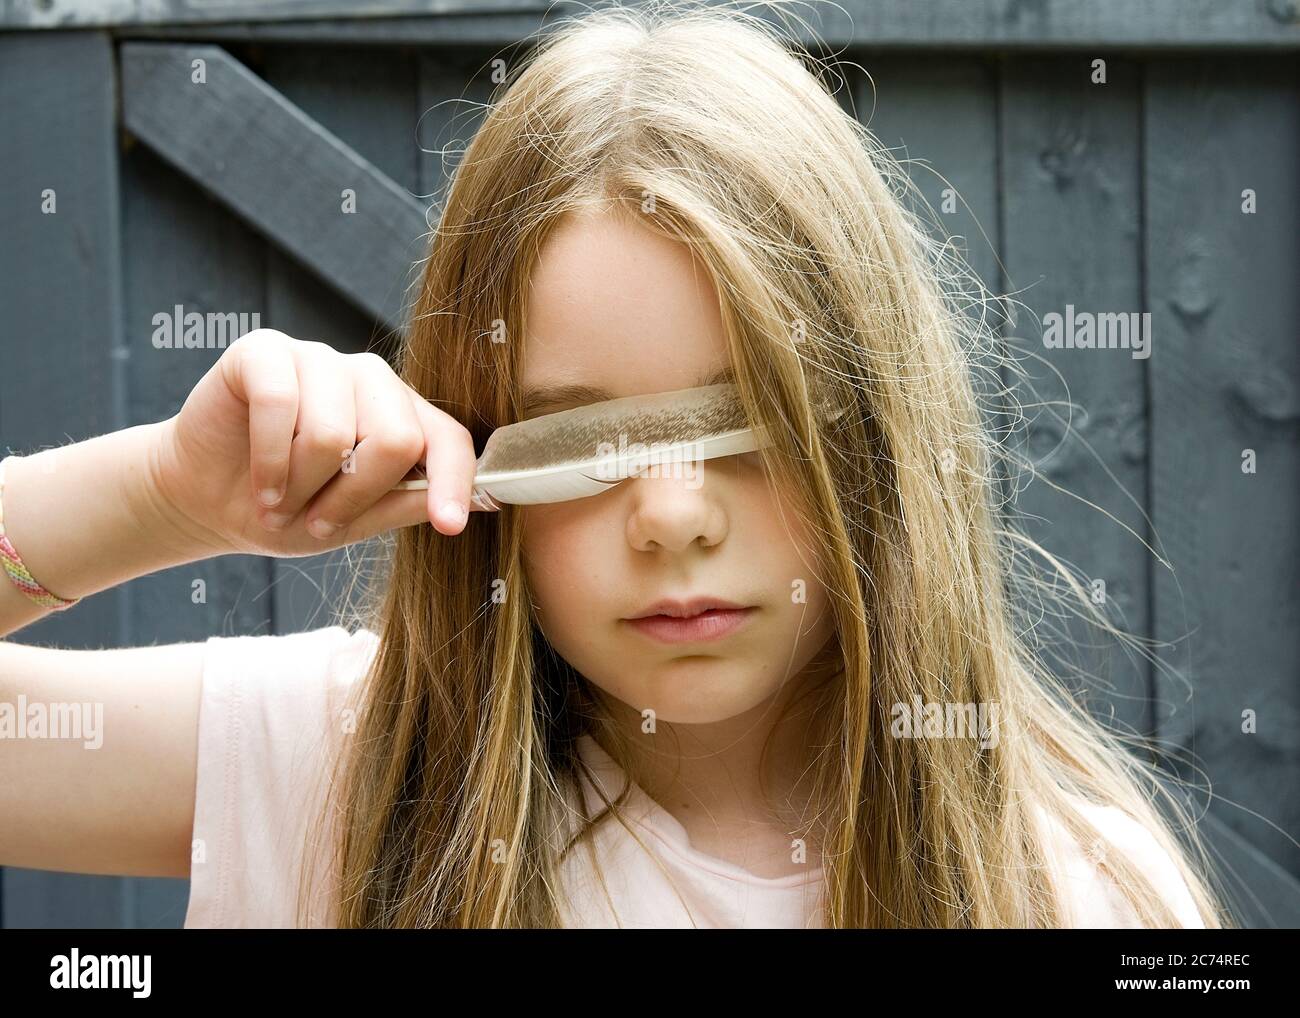 A blonde girl holding a feather over her eyes Stock Photo